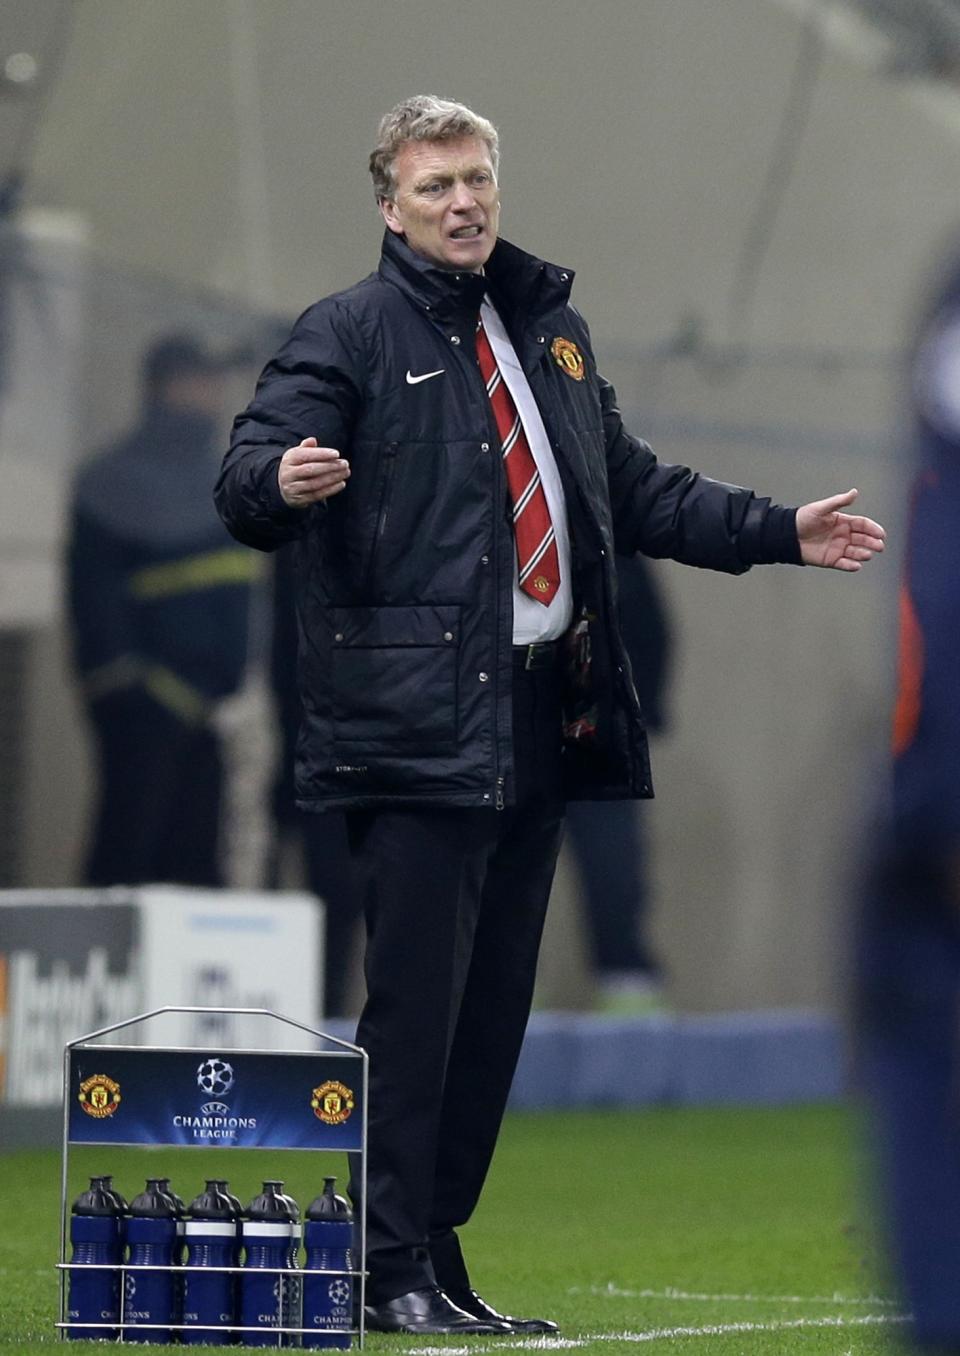 Manchester United's coach David Moyes reacts after to a players' mistake during a Champions League, round of 16, first leg soccer match against Olympiakos at Georgios Karaiskakis stadium, in Piraeus port, near Athens, on Tuesday, Feb. 25, 2014. Olympiakos won 2-0. (AP Photo/Thanassis Stavrakis)